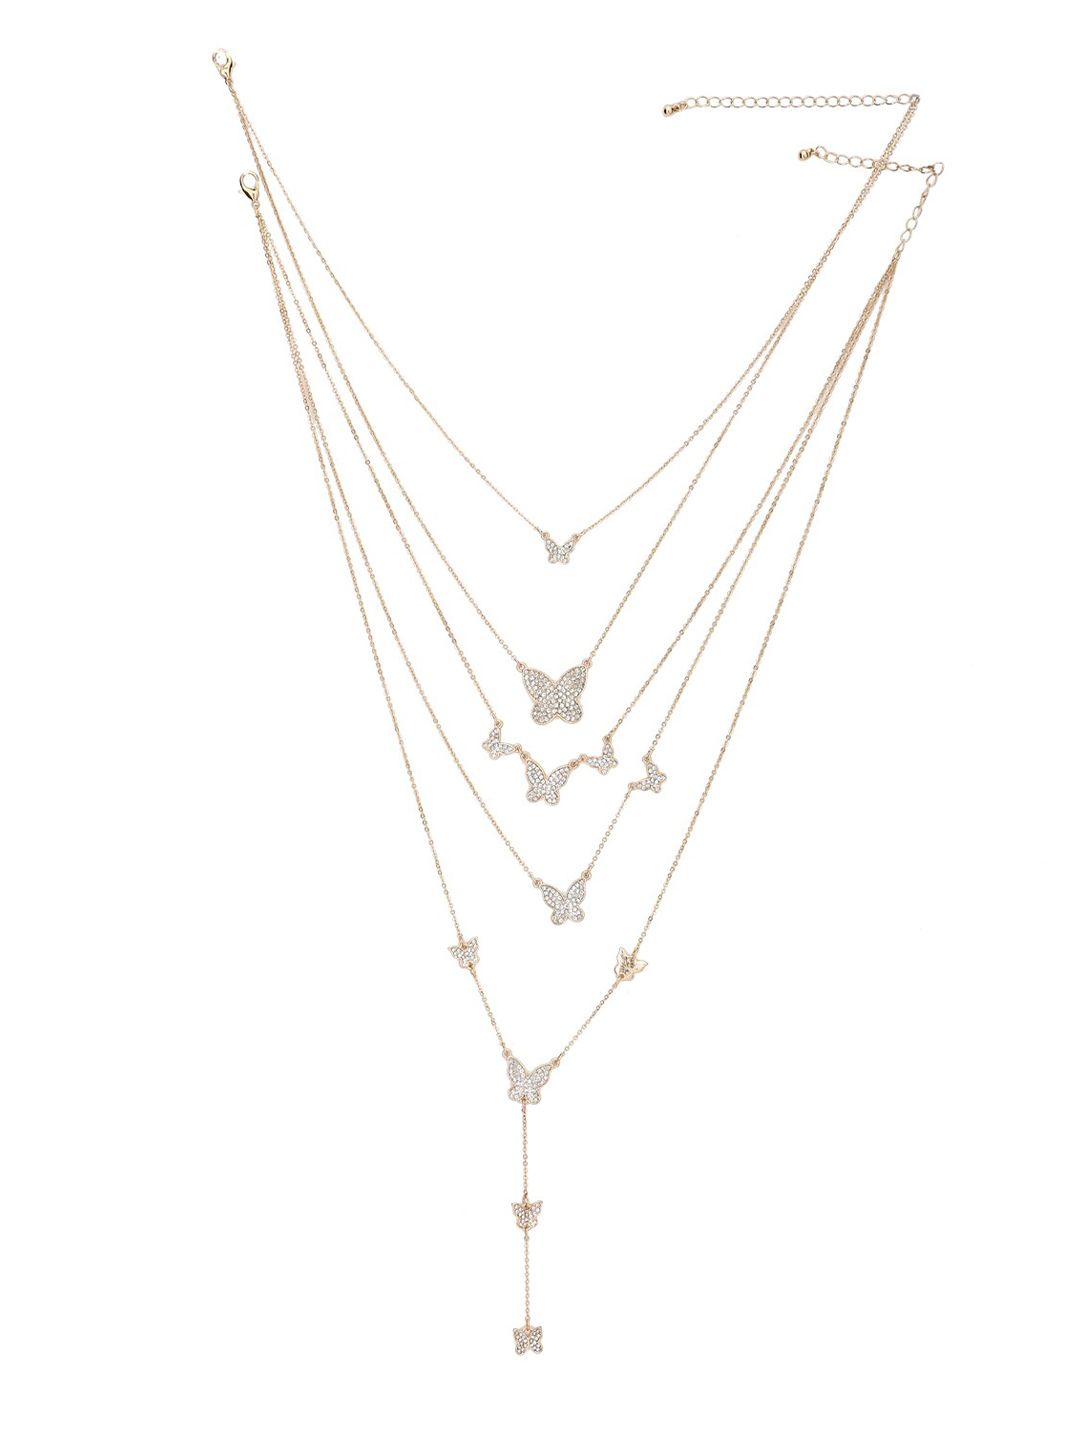 FOREVER 21 Gold-Toned & White Layered Necklace Price in India